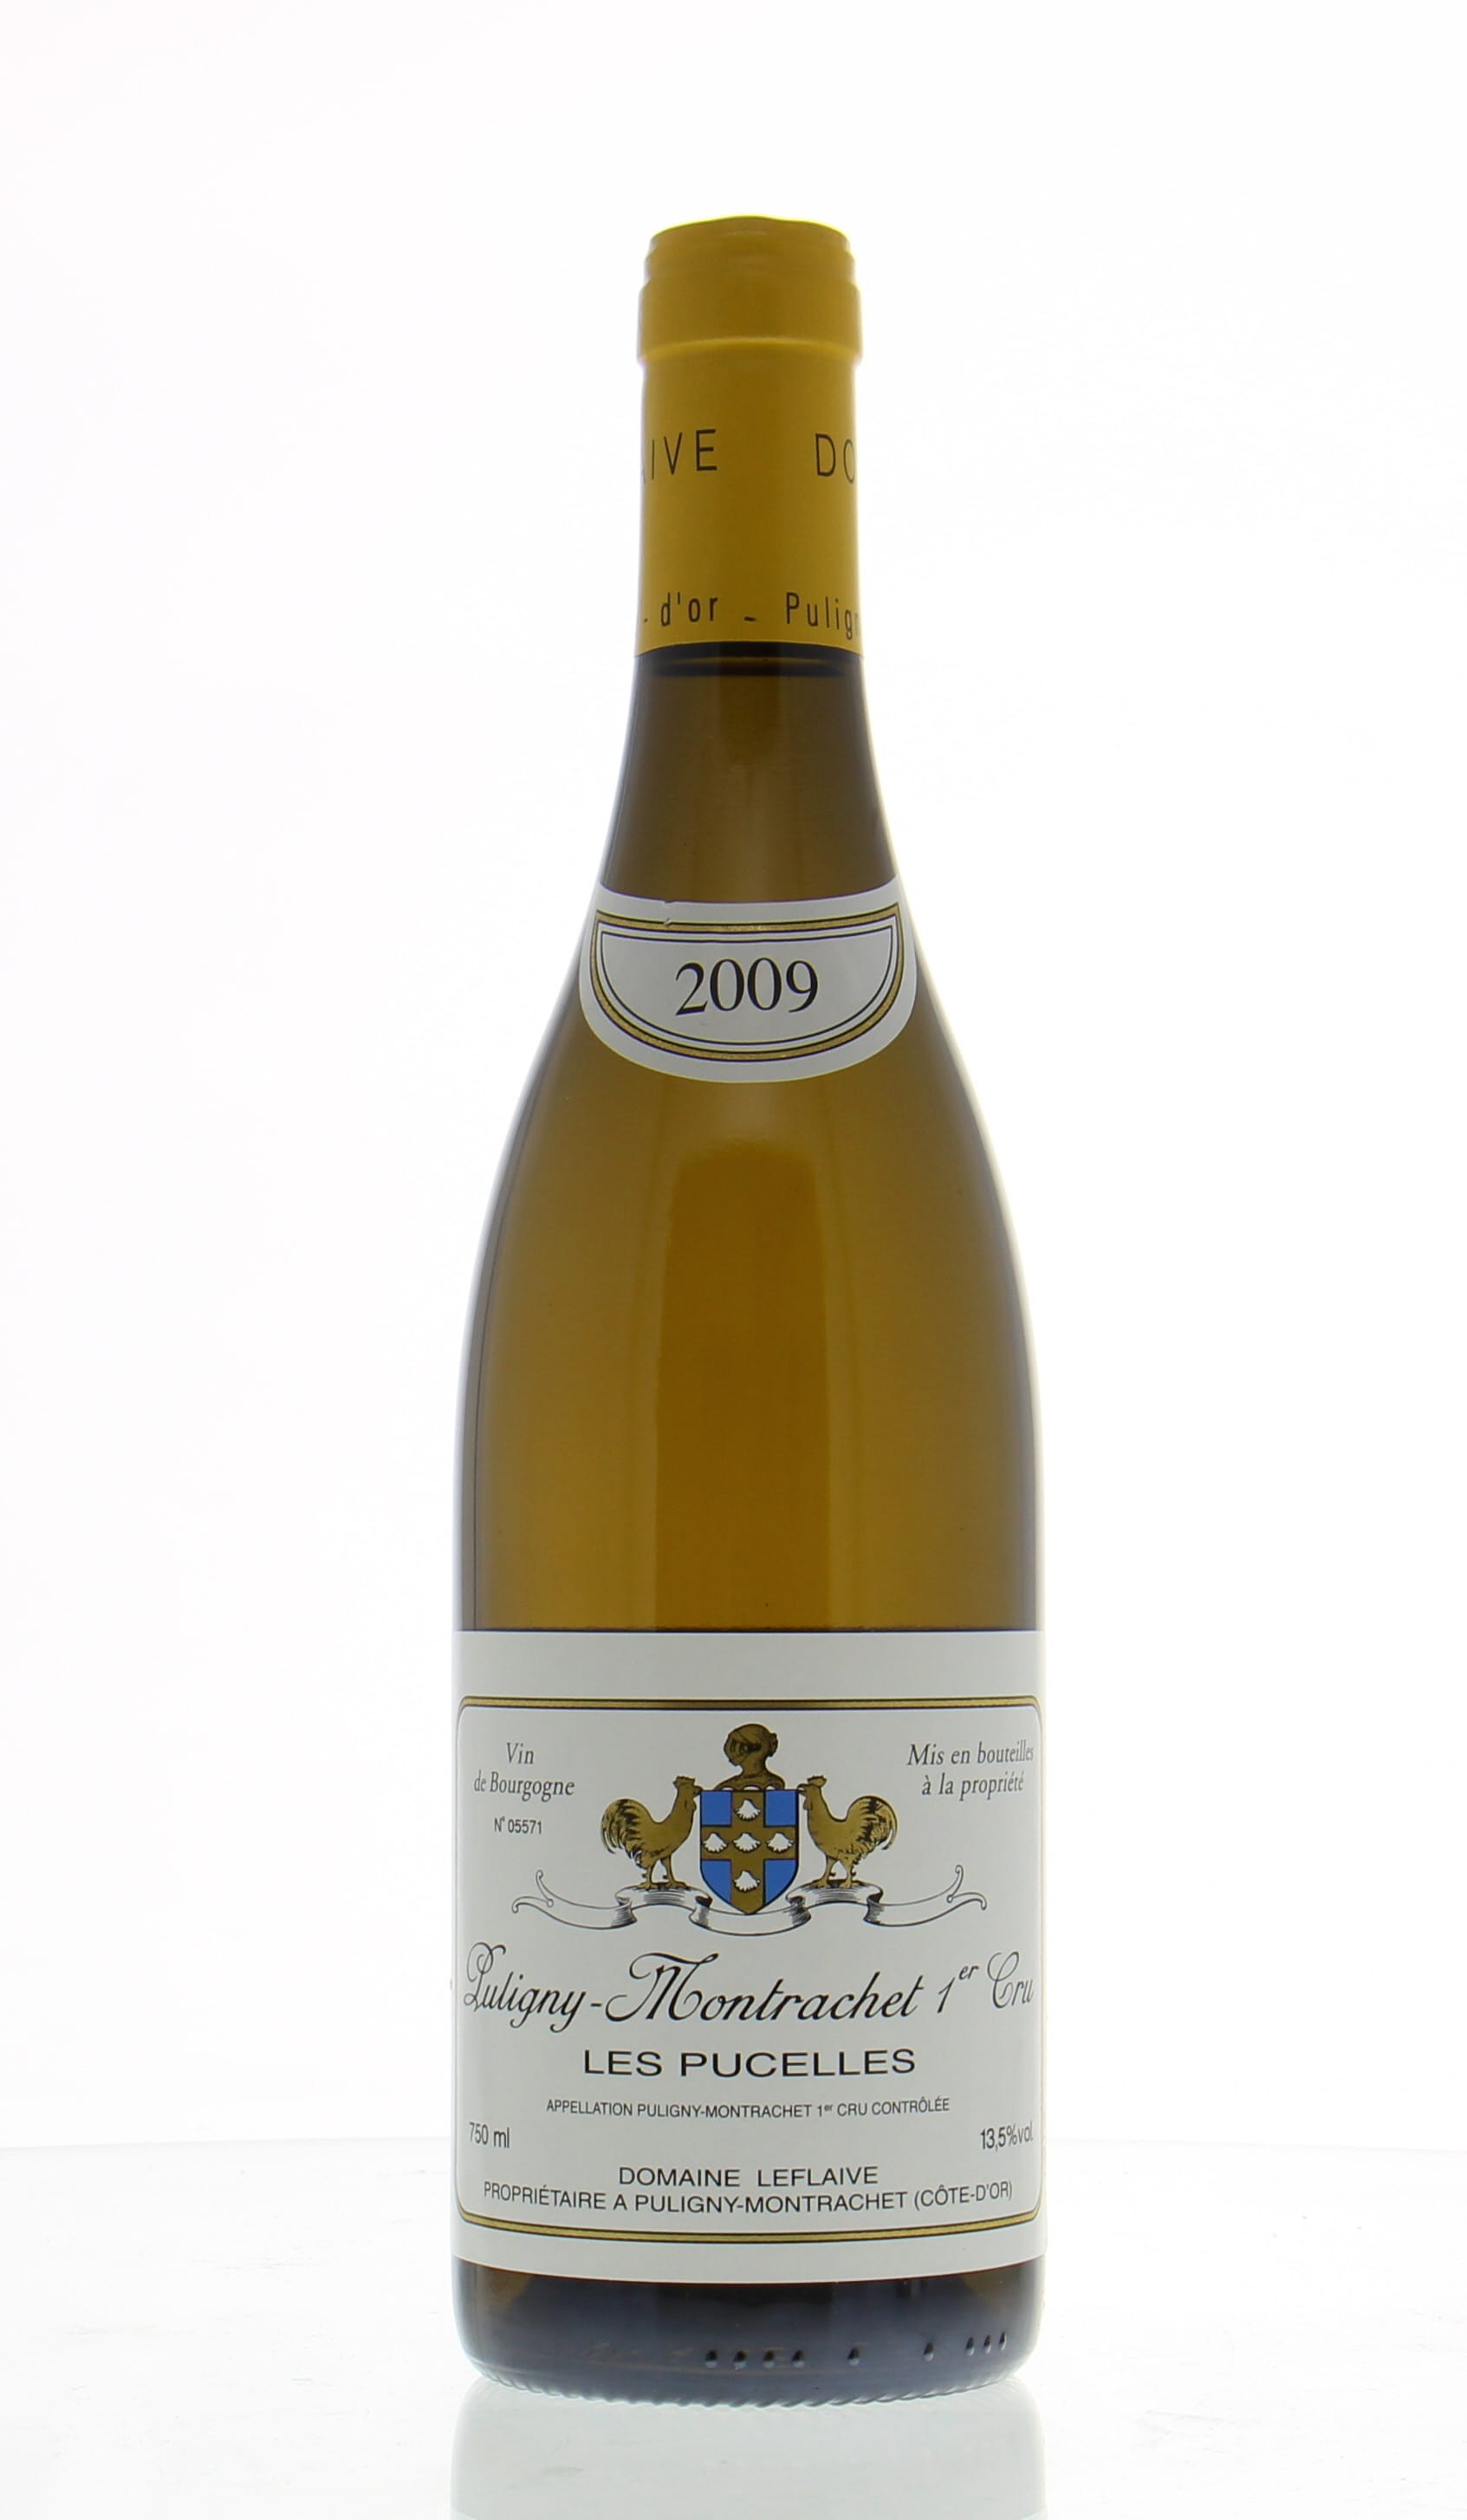 Domaine Leflaive - Puligny Montrachet Pucelles 2009 From Original Wooden Case